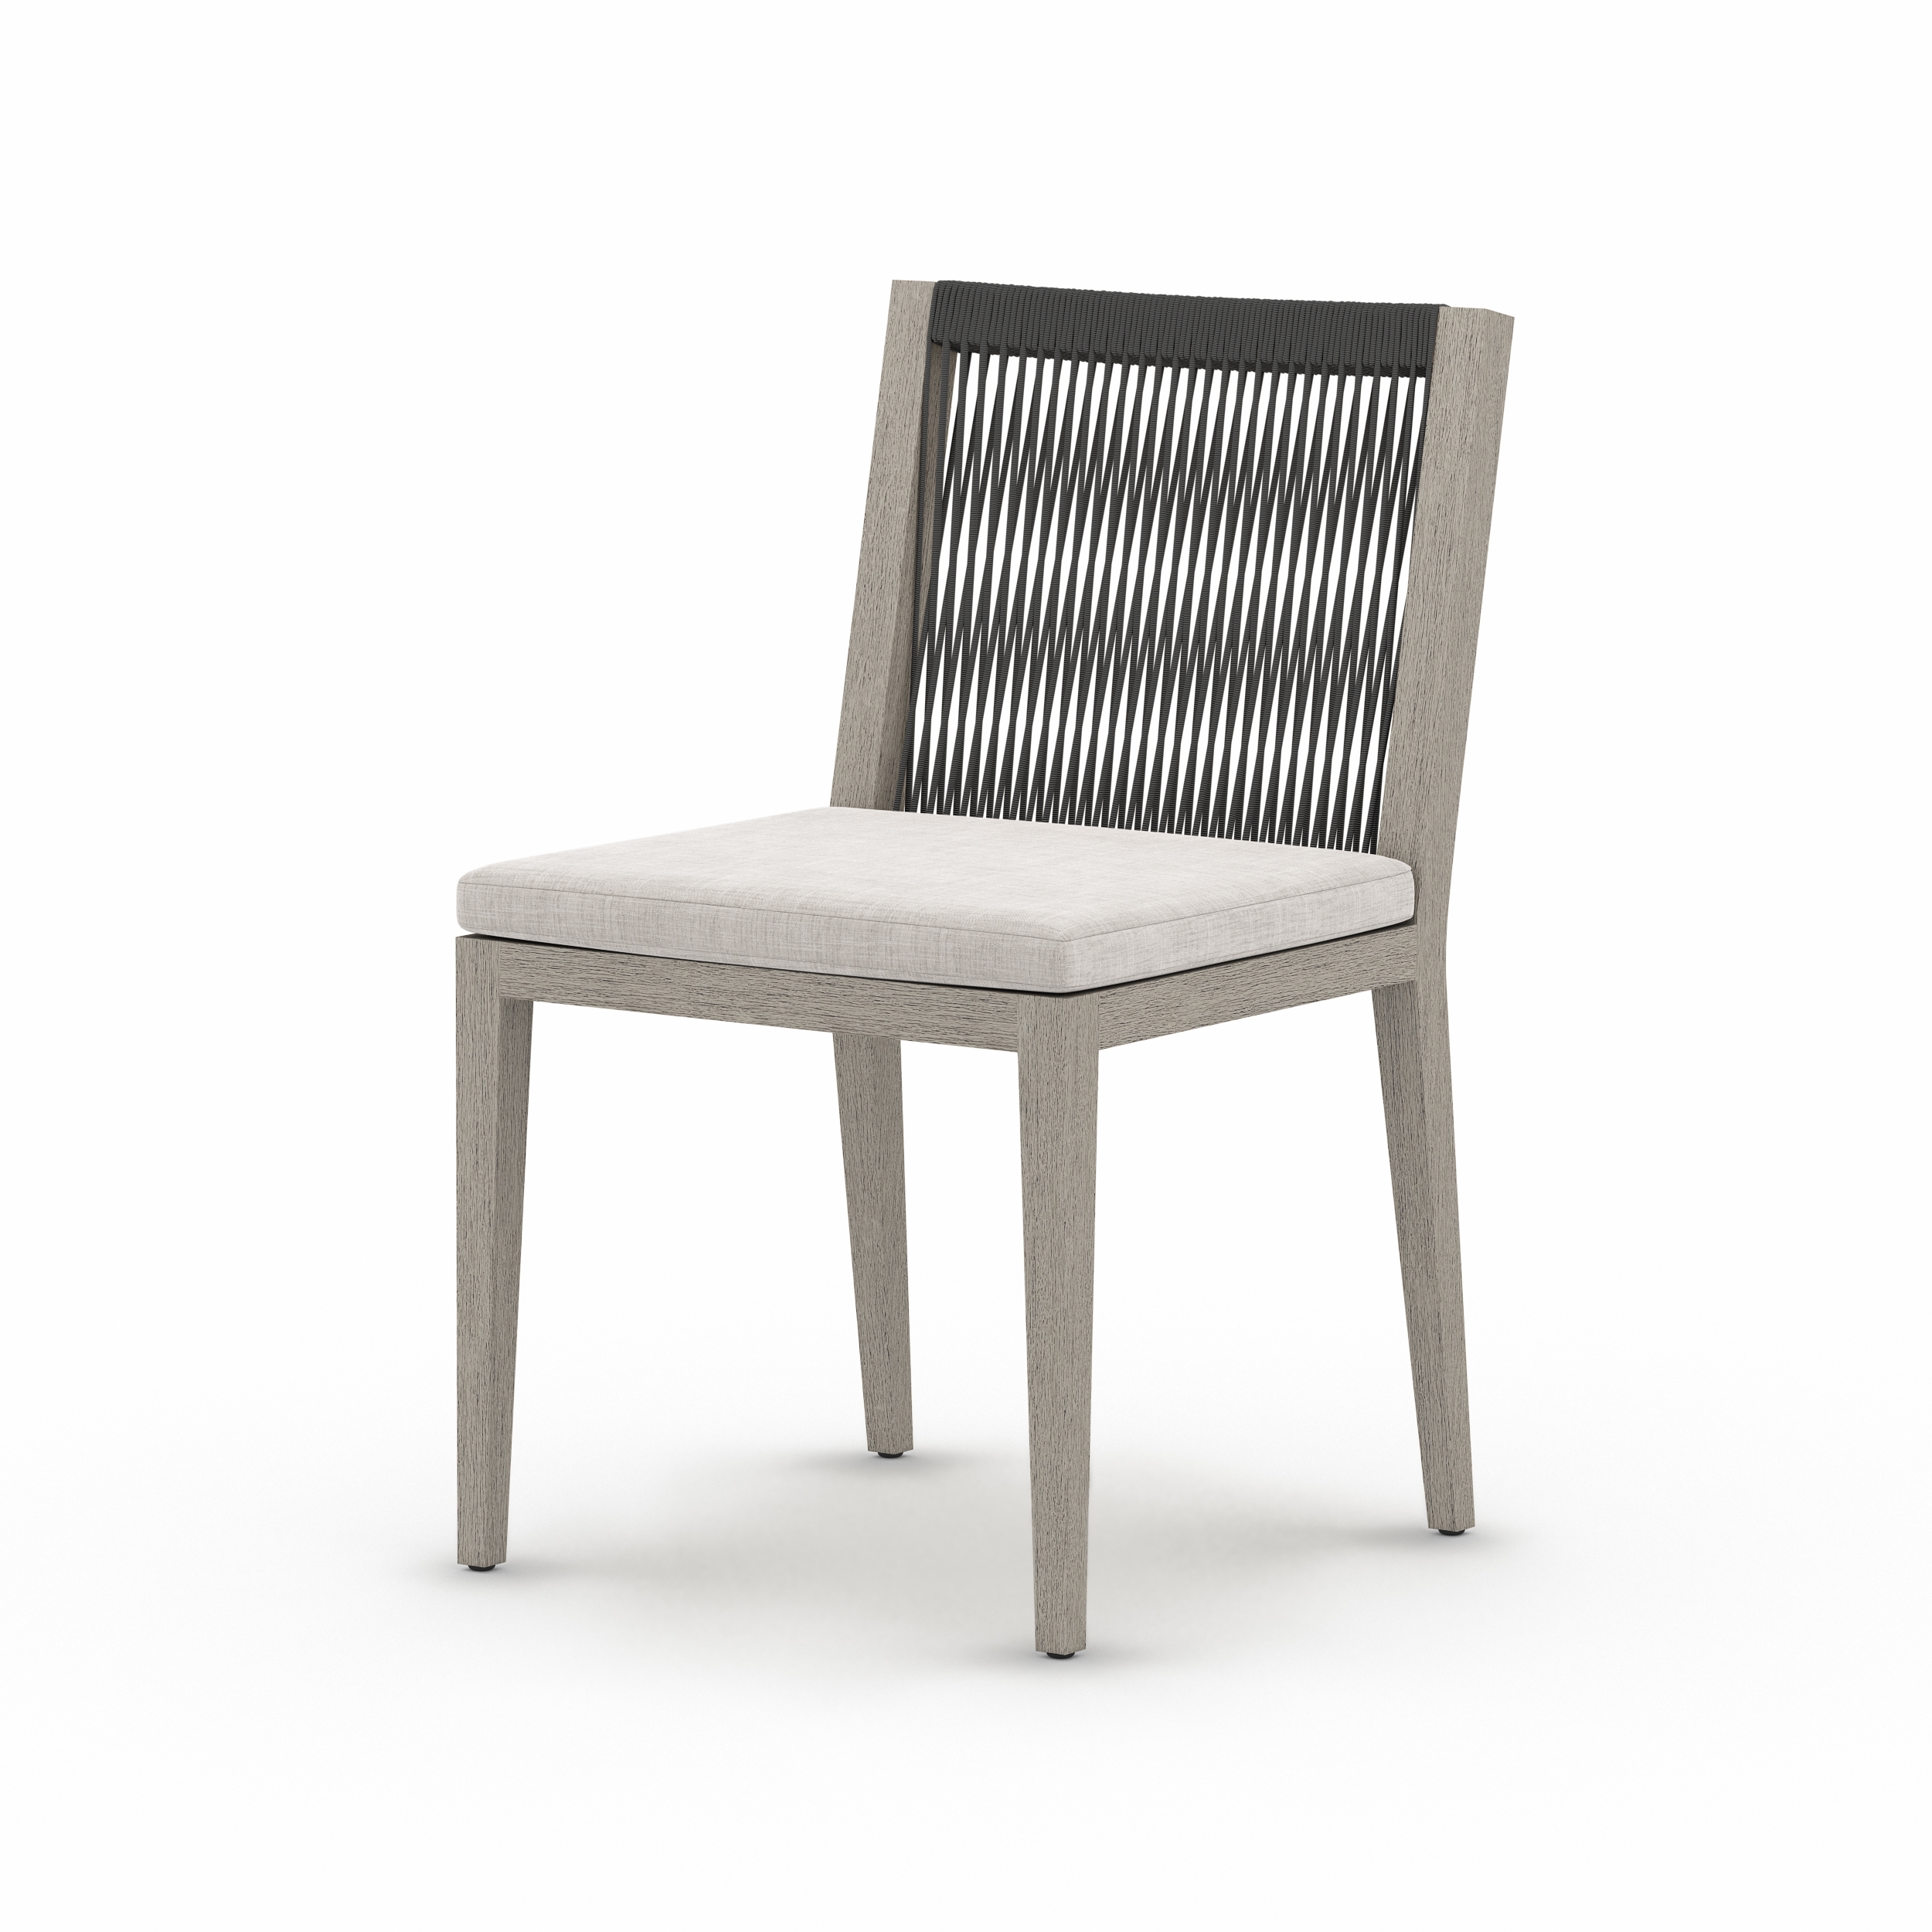 Sherwood Weathered Gray Outdoor Dining Chair